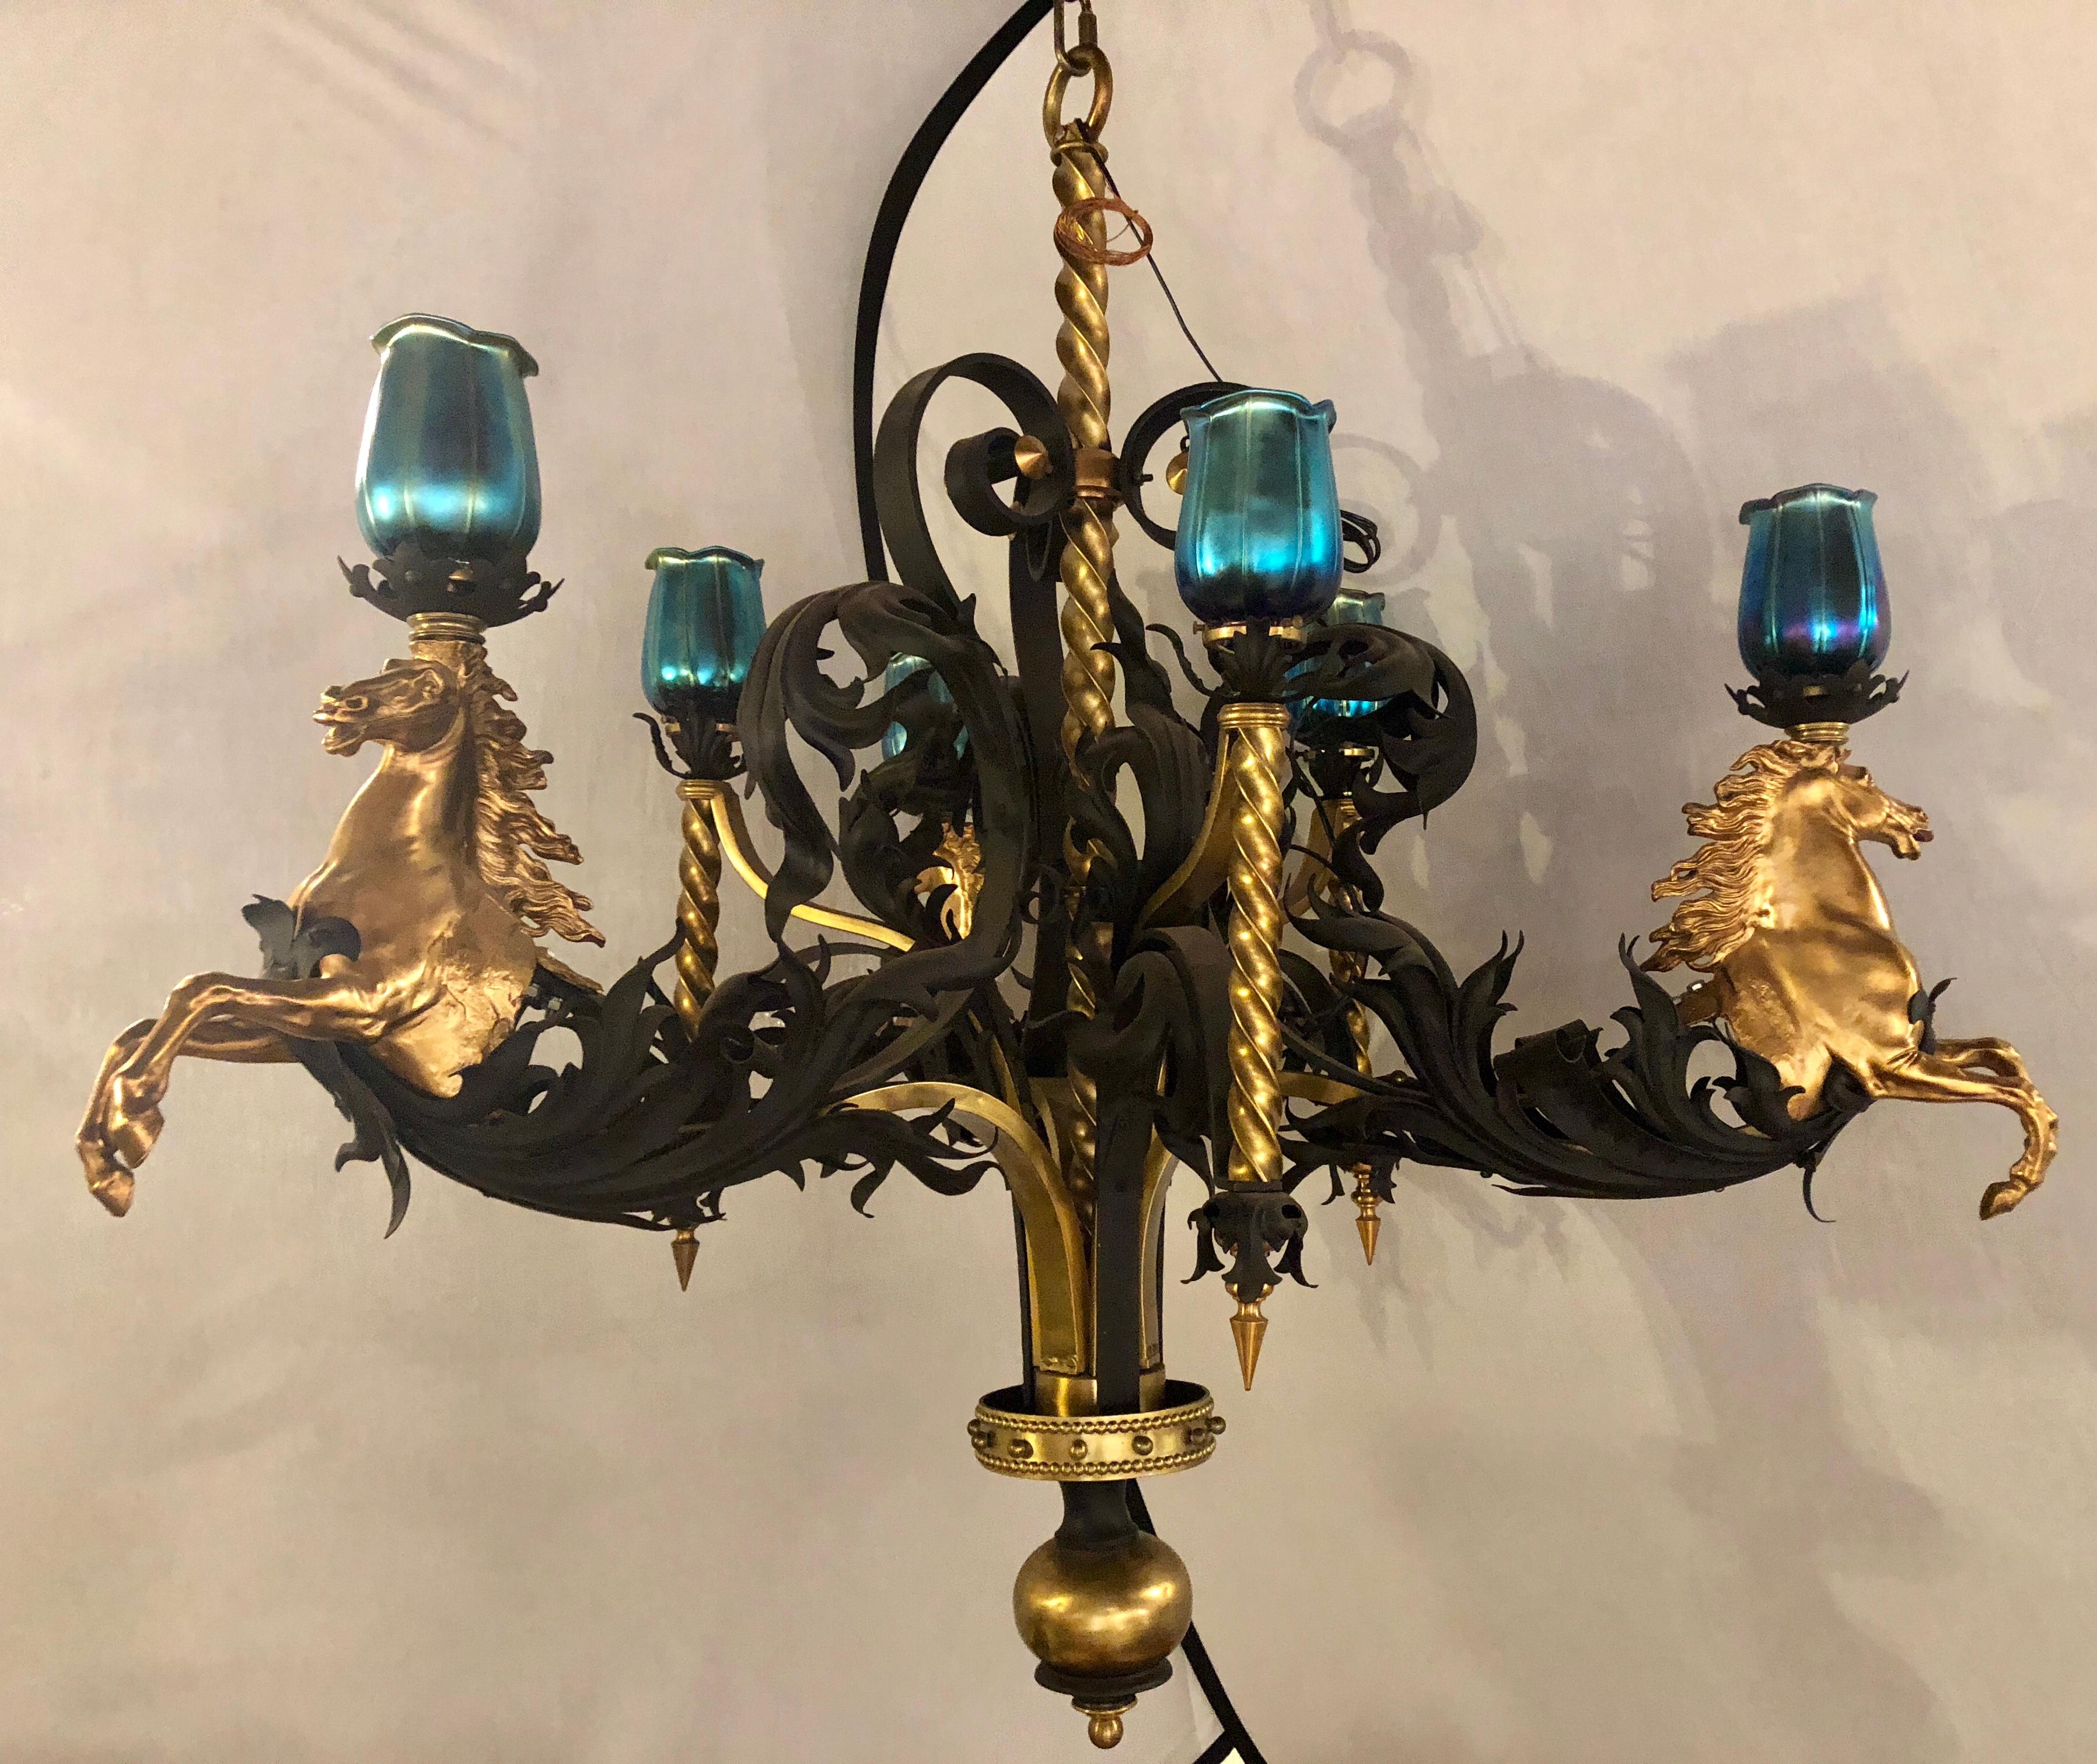 A bronze and wrought iron palatial stallions chandelier with Quezal style shades having six lights. This simply magnificent palatial chandelier would make any men’s room or patio jump over the huddles. The gilt bronze stallions leaping from their